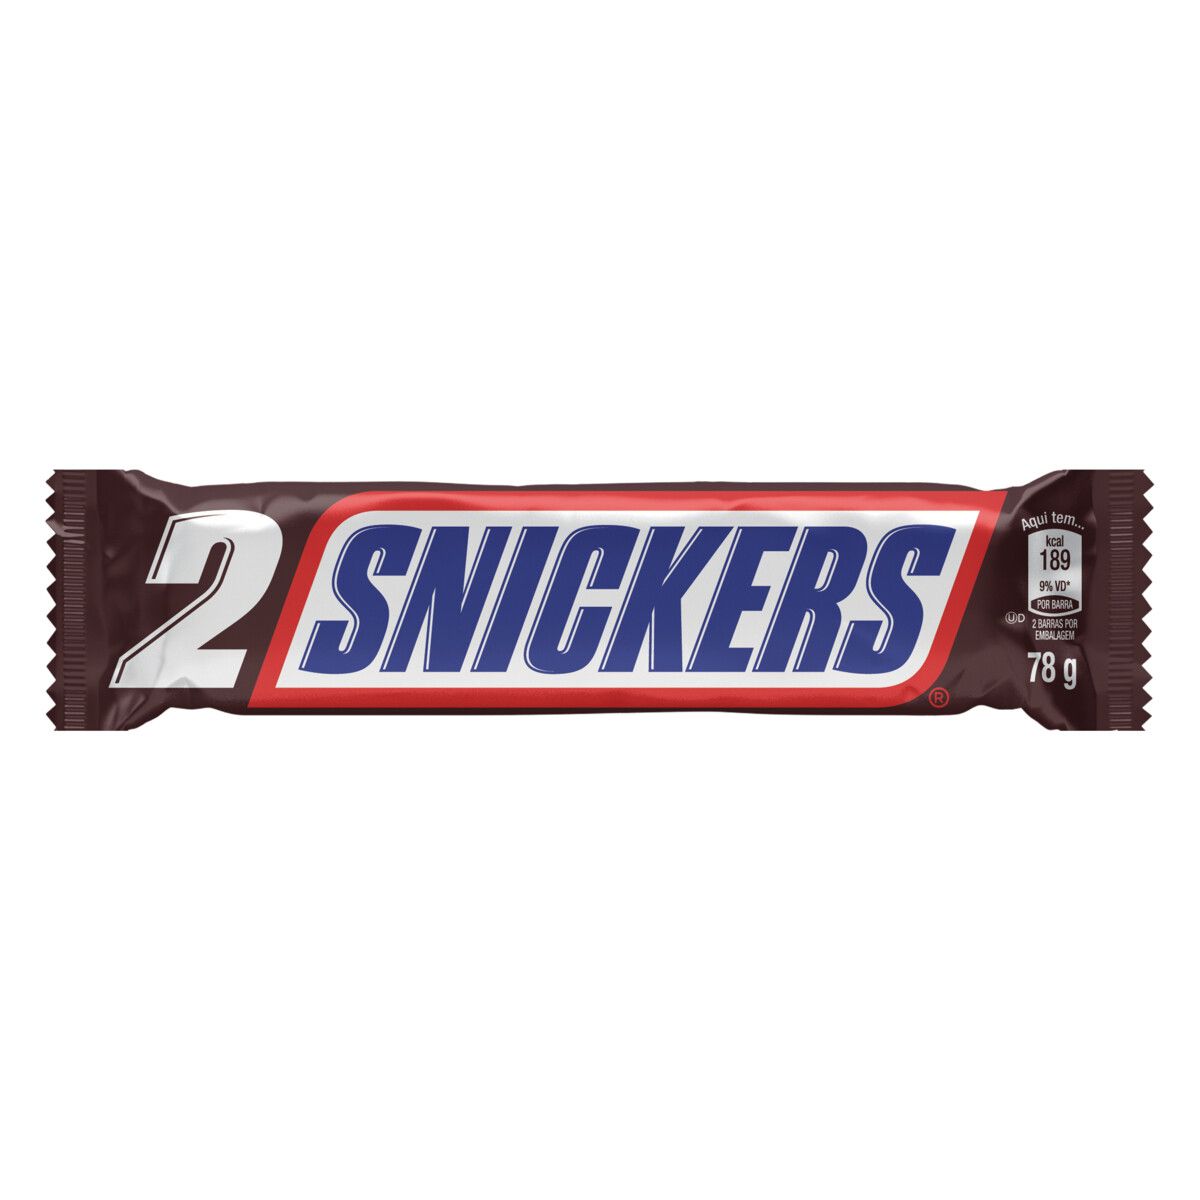 Chocolate Snickers Pacote 78g 2 Unidades